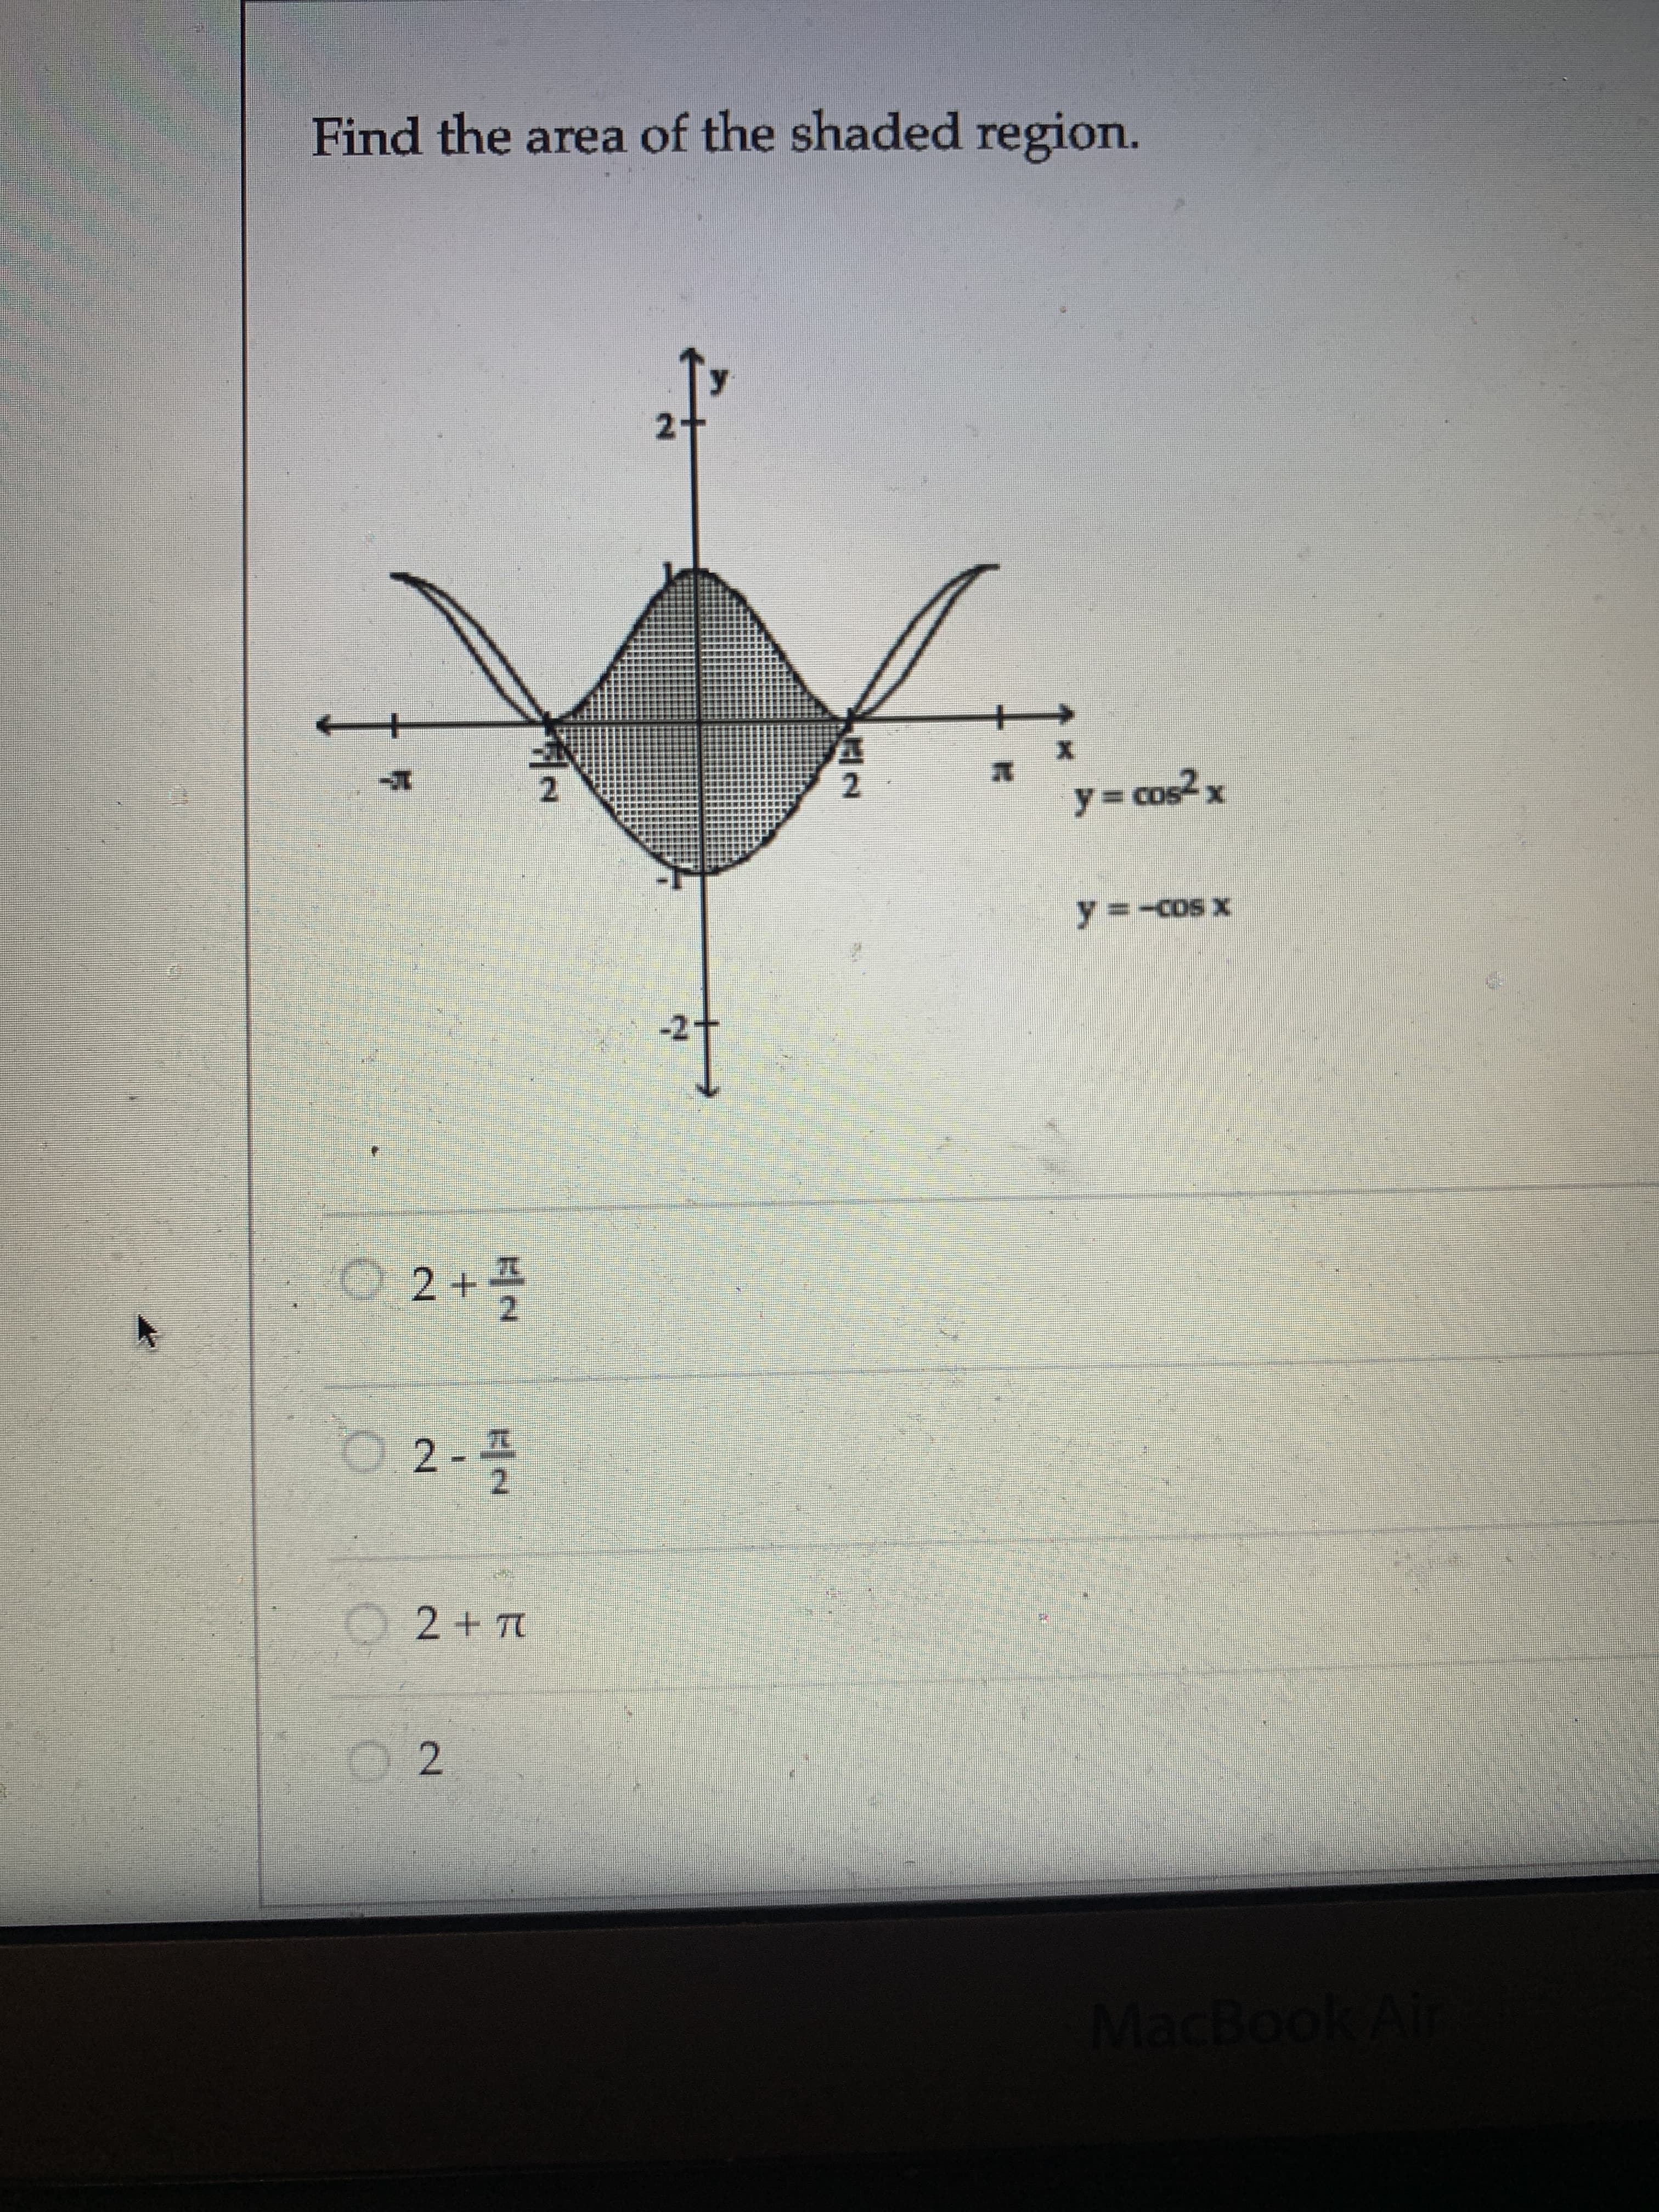 /2
MacBook Air
2+T
O.2
+乙0
x saD- = A
X-90
శం = A
2.
2.
1-
Find the area of the shaded region.
